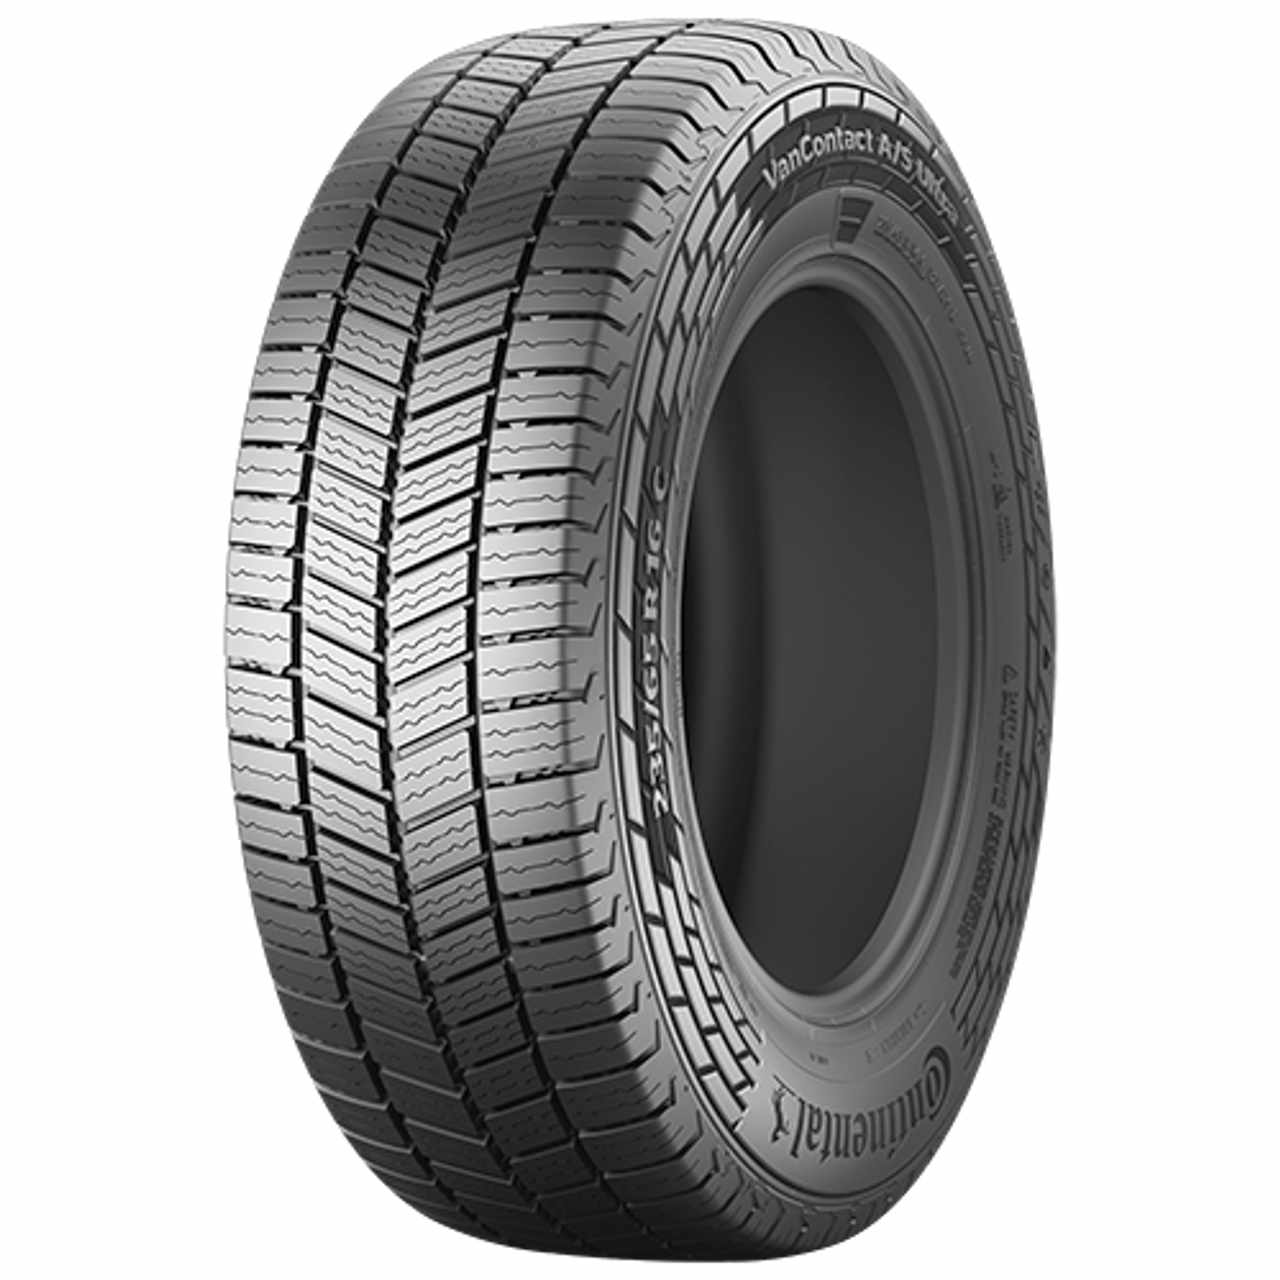 CONTINENTAL VANCONTACT A/S ULTRA 205/70R15C 106R BSW